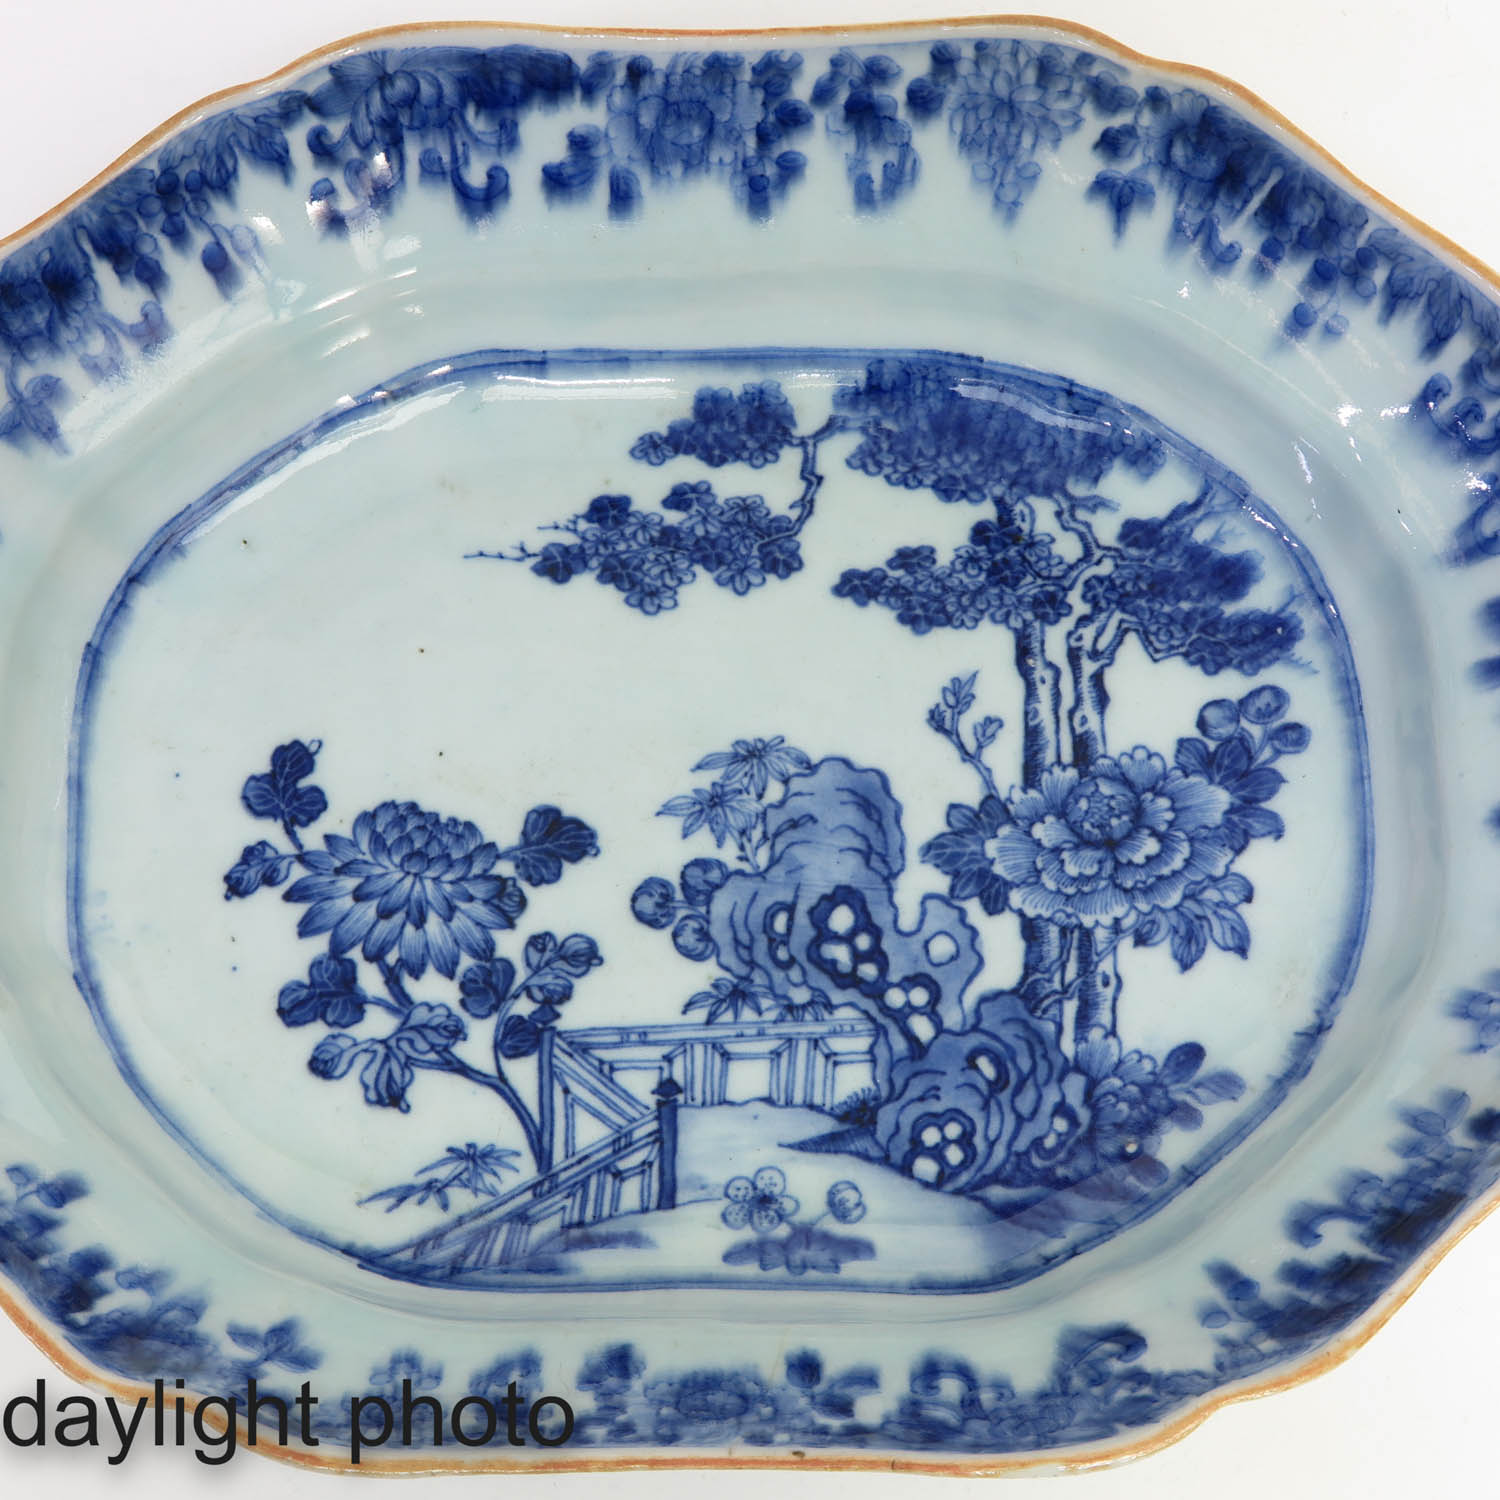 A Blue and White Serving Dish - Image 7 of 8